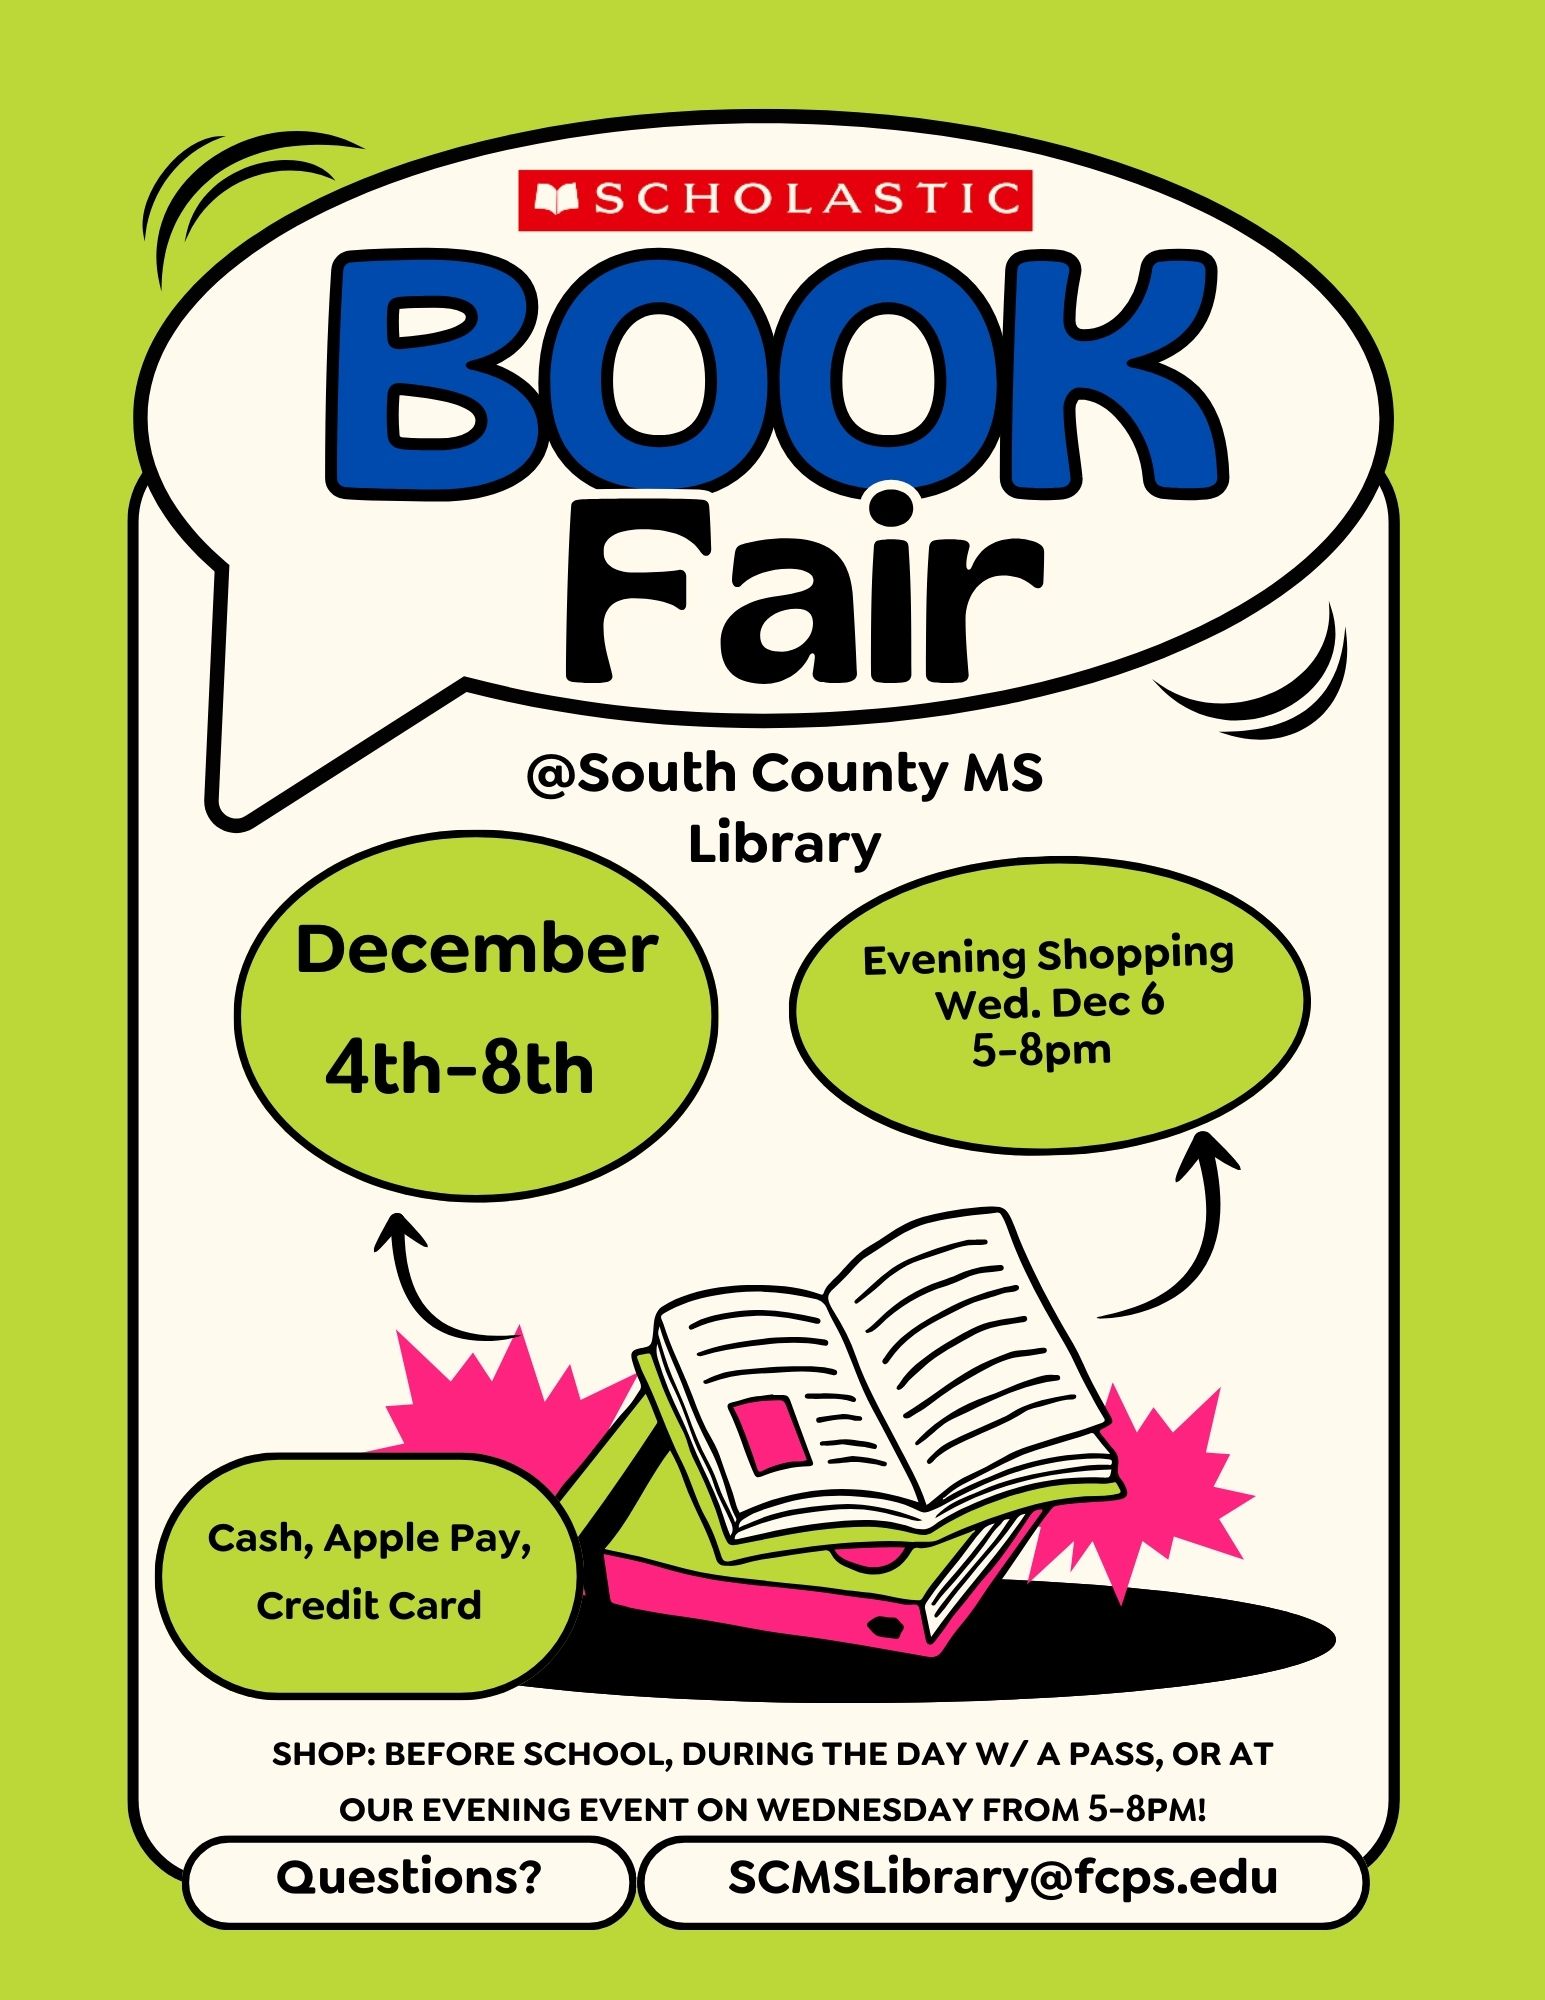 Book Fair Flyer.  December 4th-8th. Evening Shopping Wed. Dec 6 from 5-8pm.